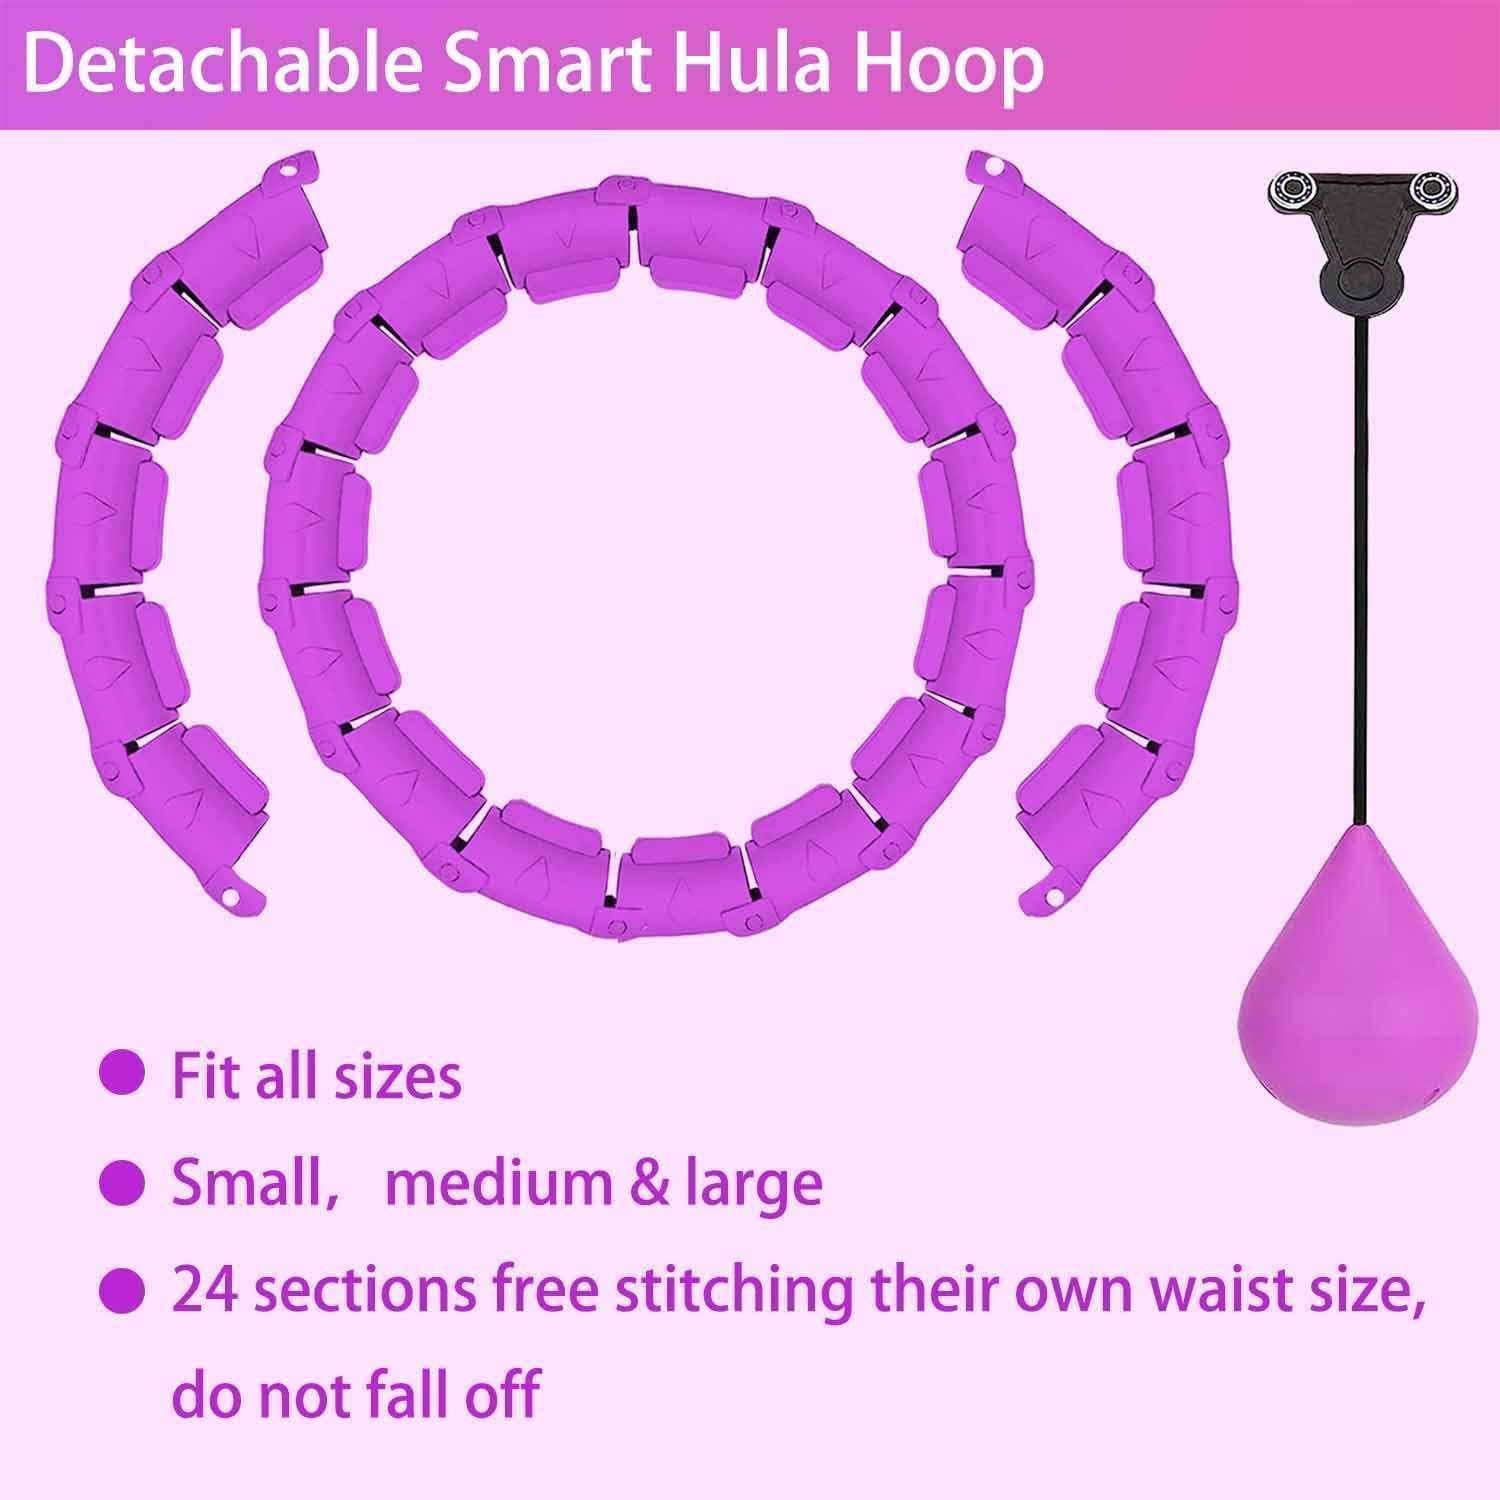 Image shows the links of the hula hoop.